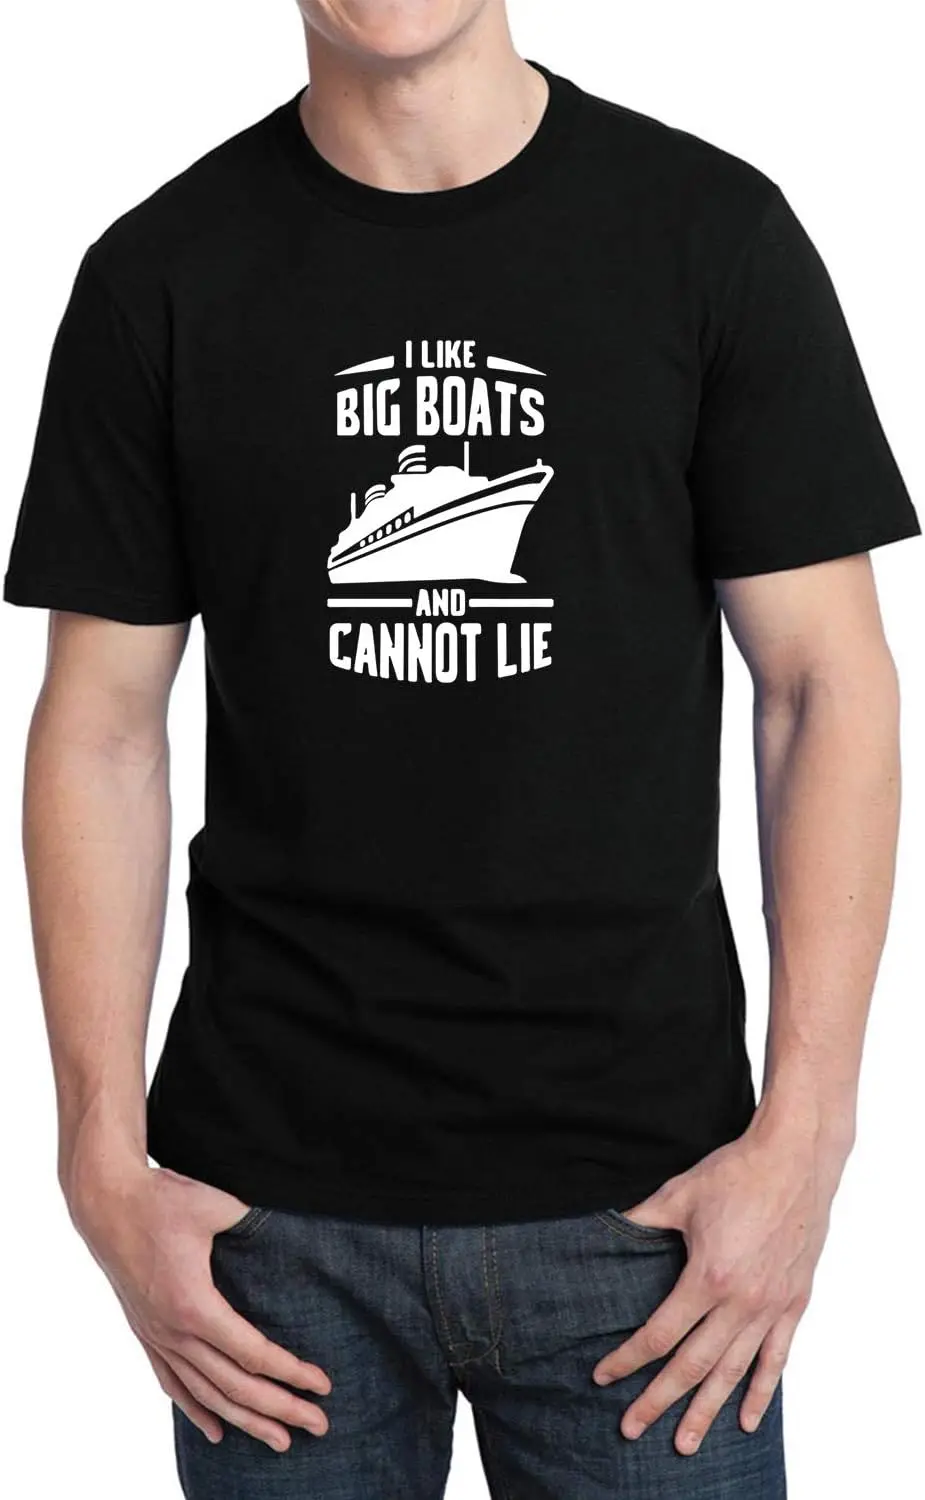 

I Like Big Boats and I Cannot Lie Titanic Funny Quote_001243 T-Shirt Birthday for Him LG Man Black